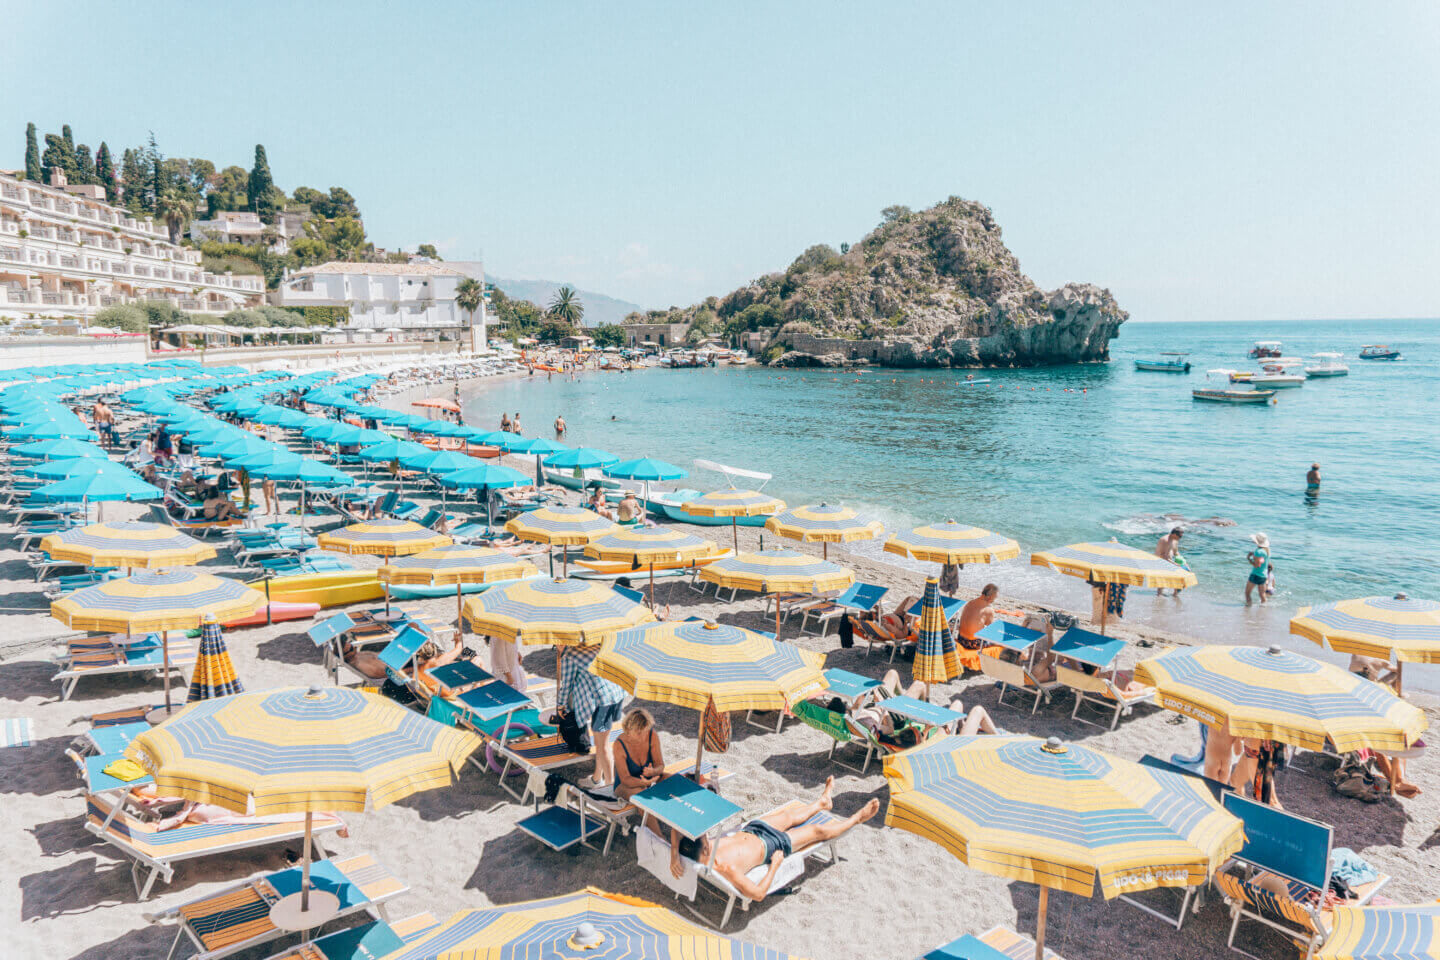 The colourful umbrellas and sunbathers at Taormina beach, a tourist town on Sicily